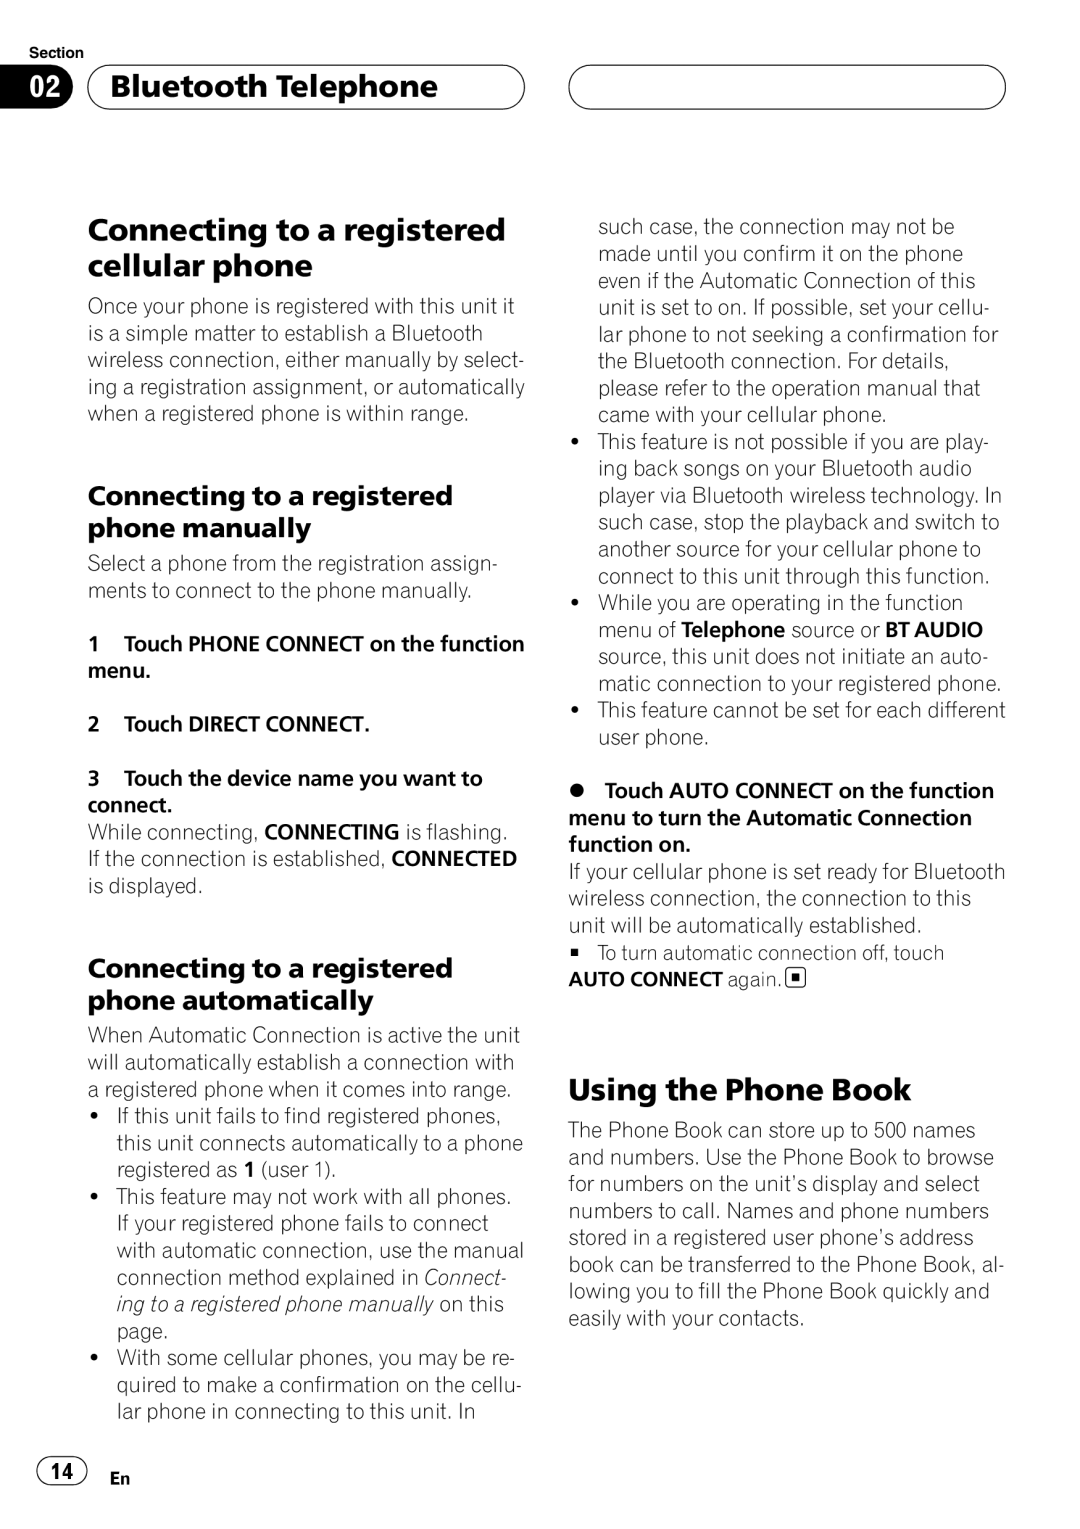 Pioneer CD-BTB200 owner manual Bluetooth Telephone Connecting to a registered cellular phone, Using the Phone Book 